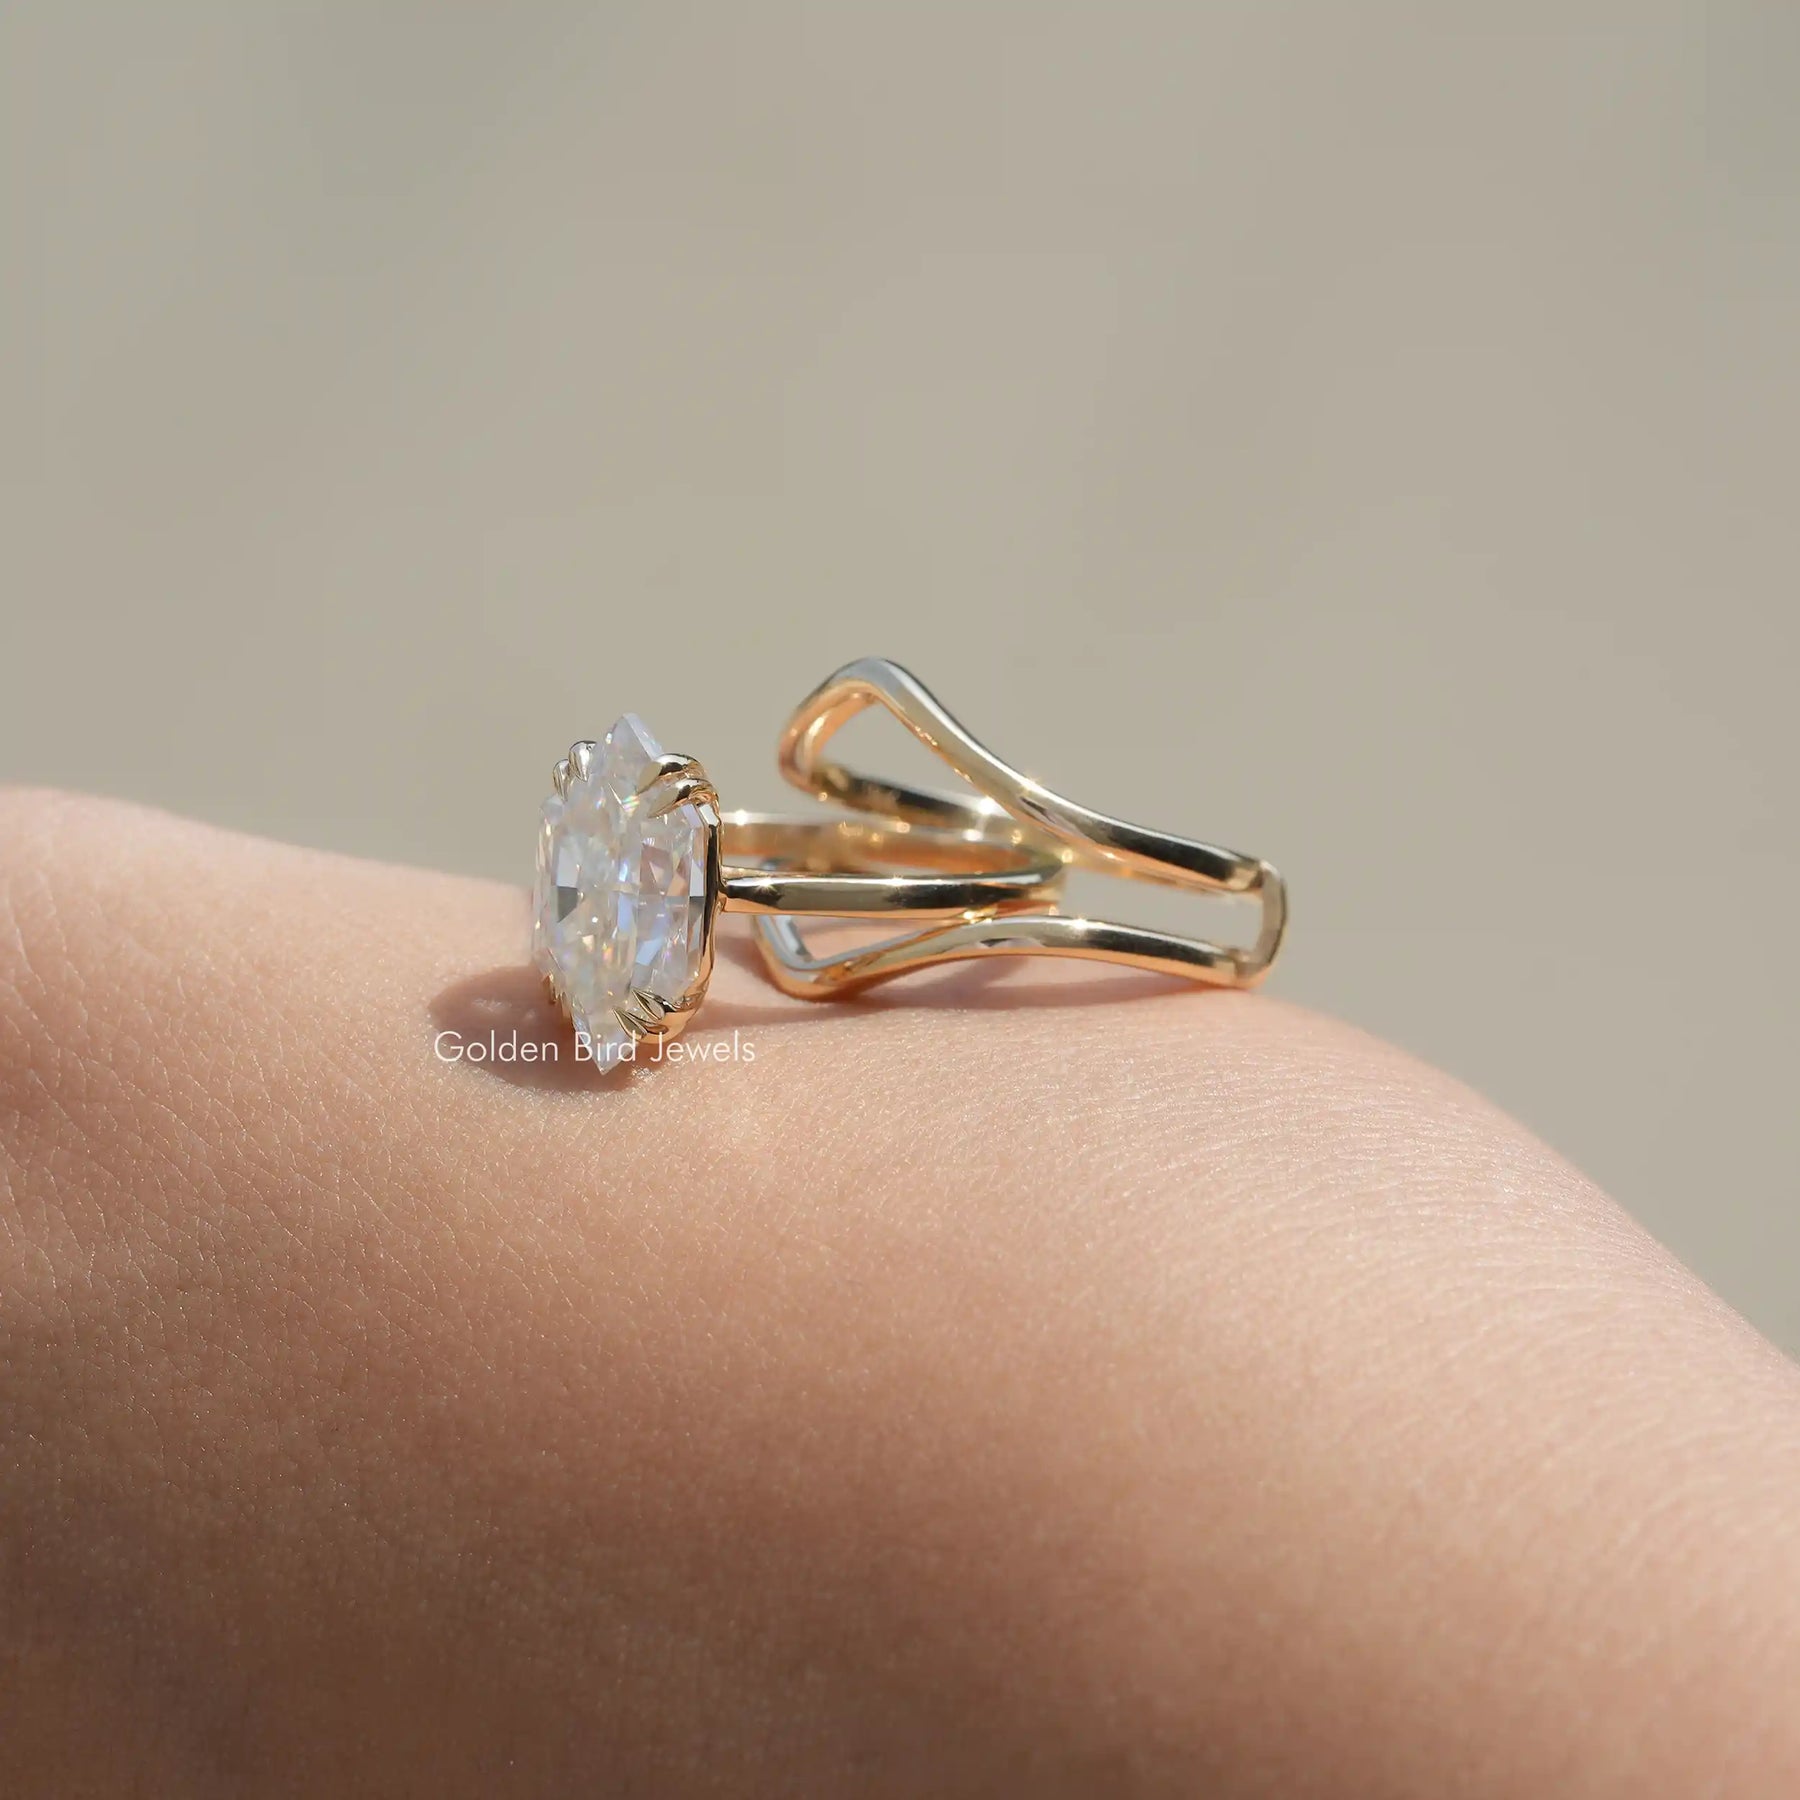 [Marquise Cut Moissanite Ring Set Made Of 18K Yellow Gold]-[Golden Bird Jewels]